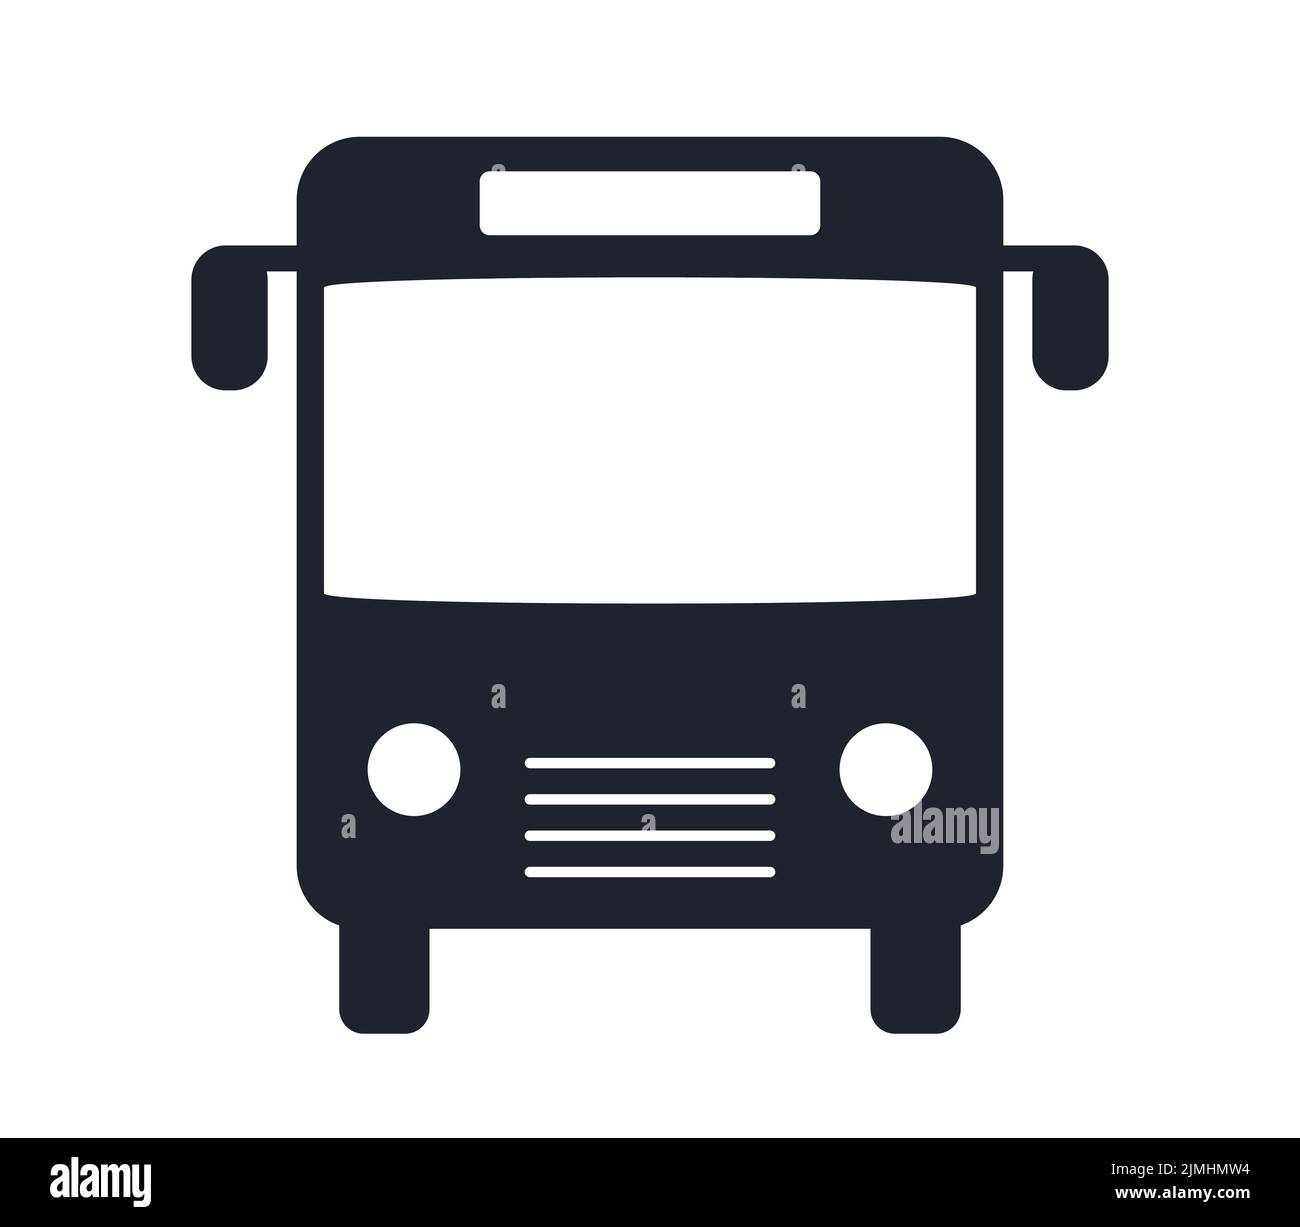 bus stop sign vector